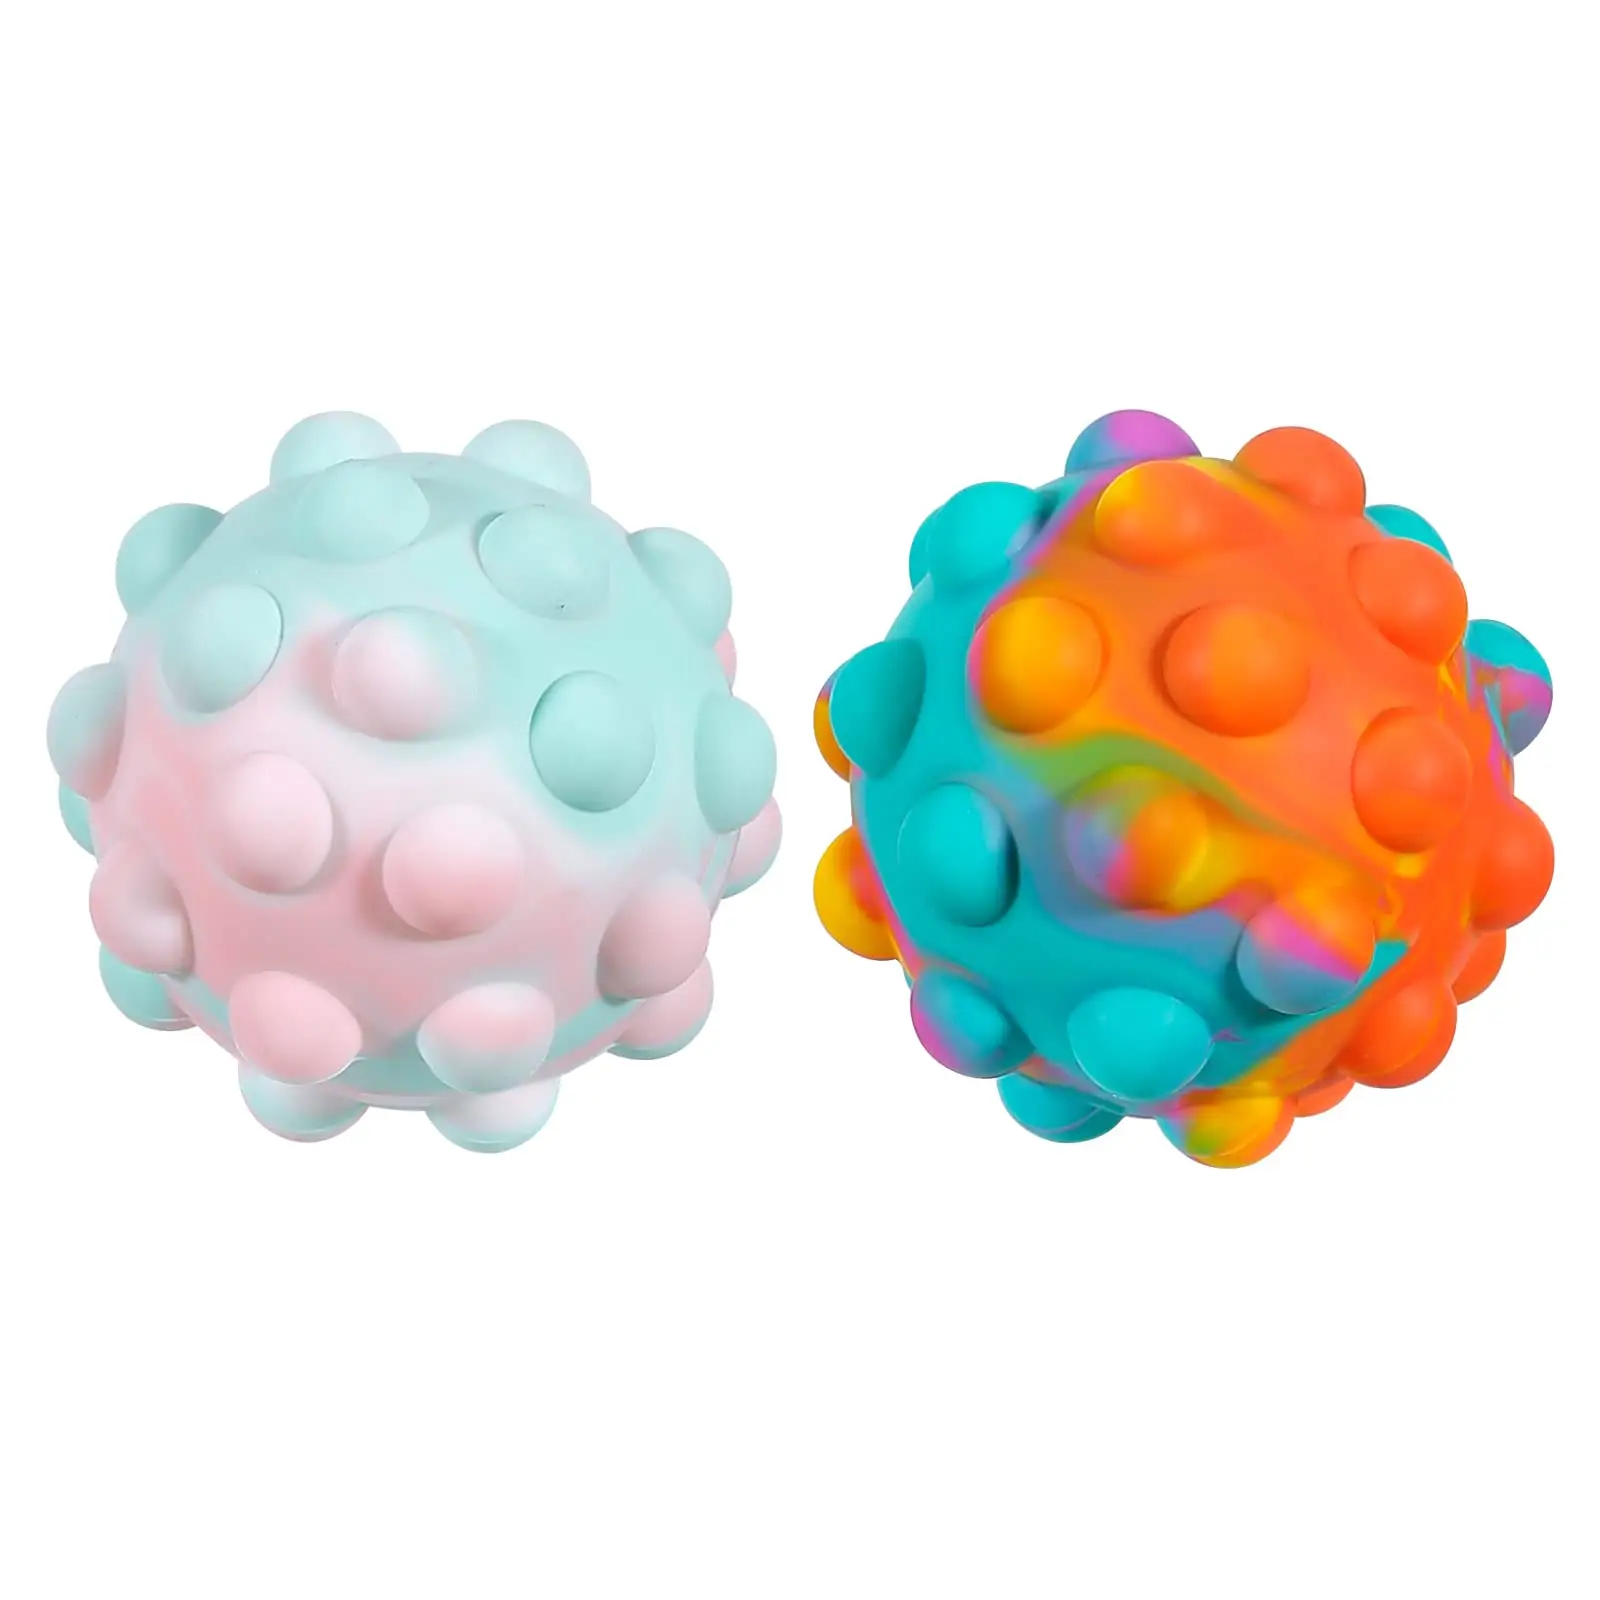 High Quality Hot Sale Push Bubble Ball Silicone Toys 3D Fidget Ball Squeeze Sensory Silicone Pop It Ball Fidget Toy